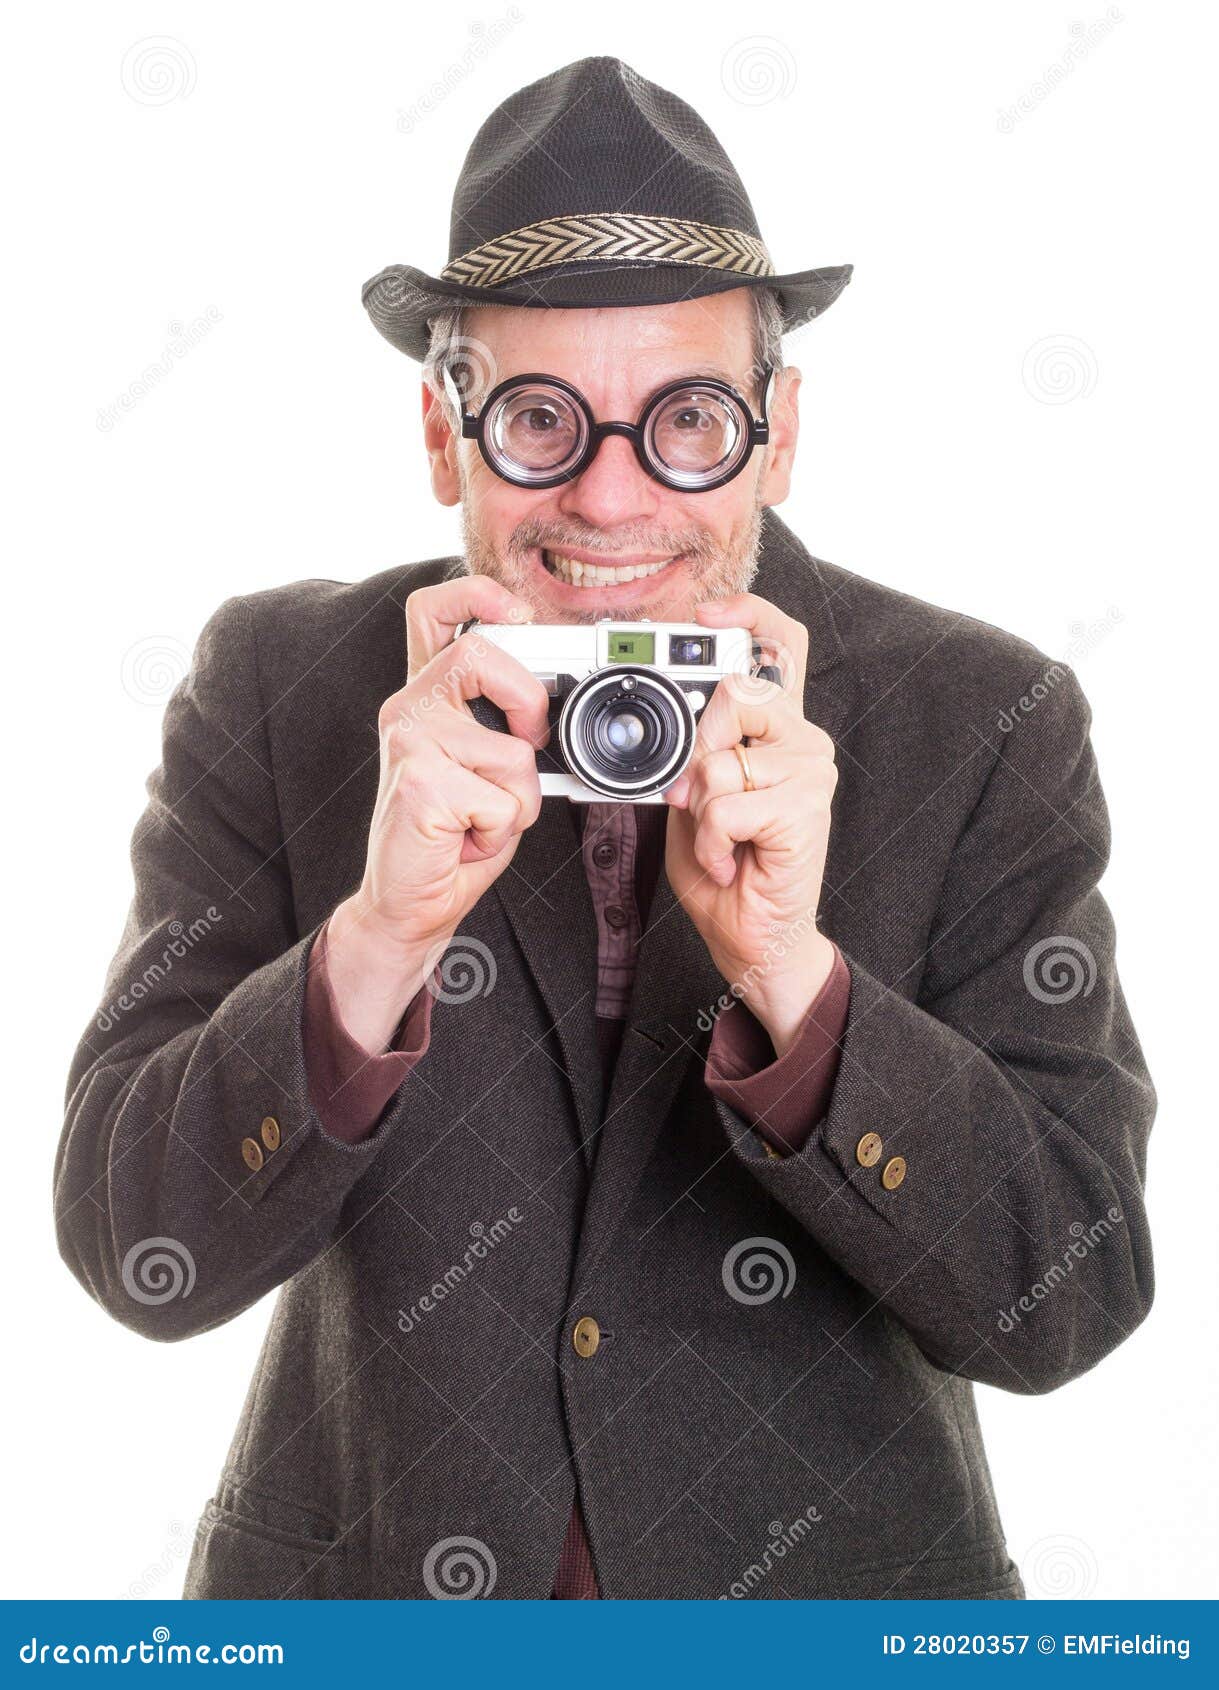 funny-man-camera-taking-picture-28020357.jpg